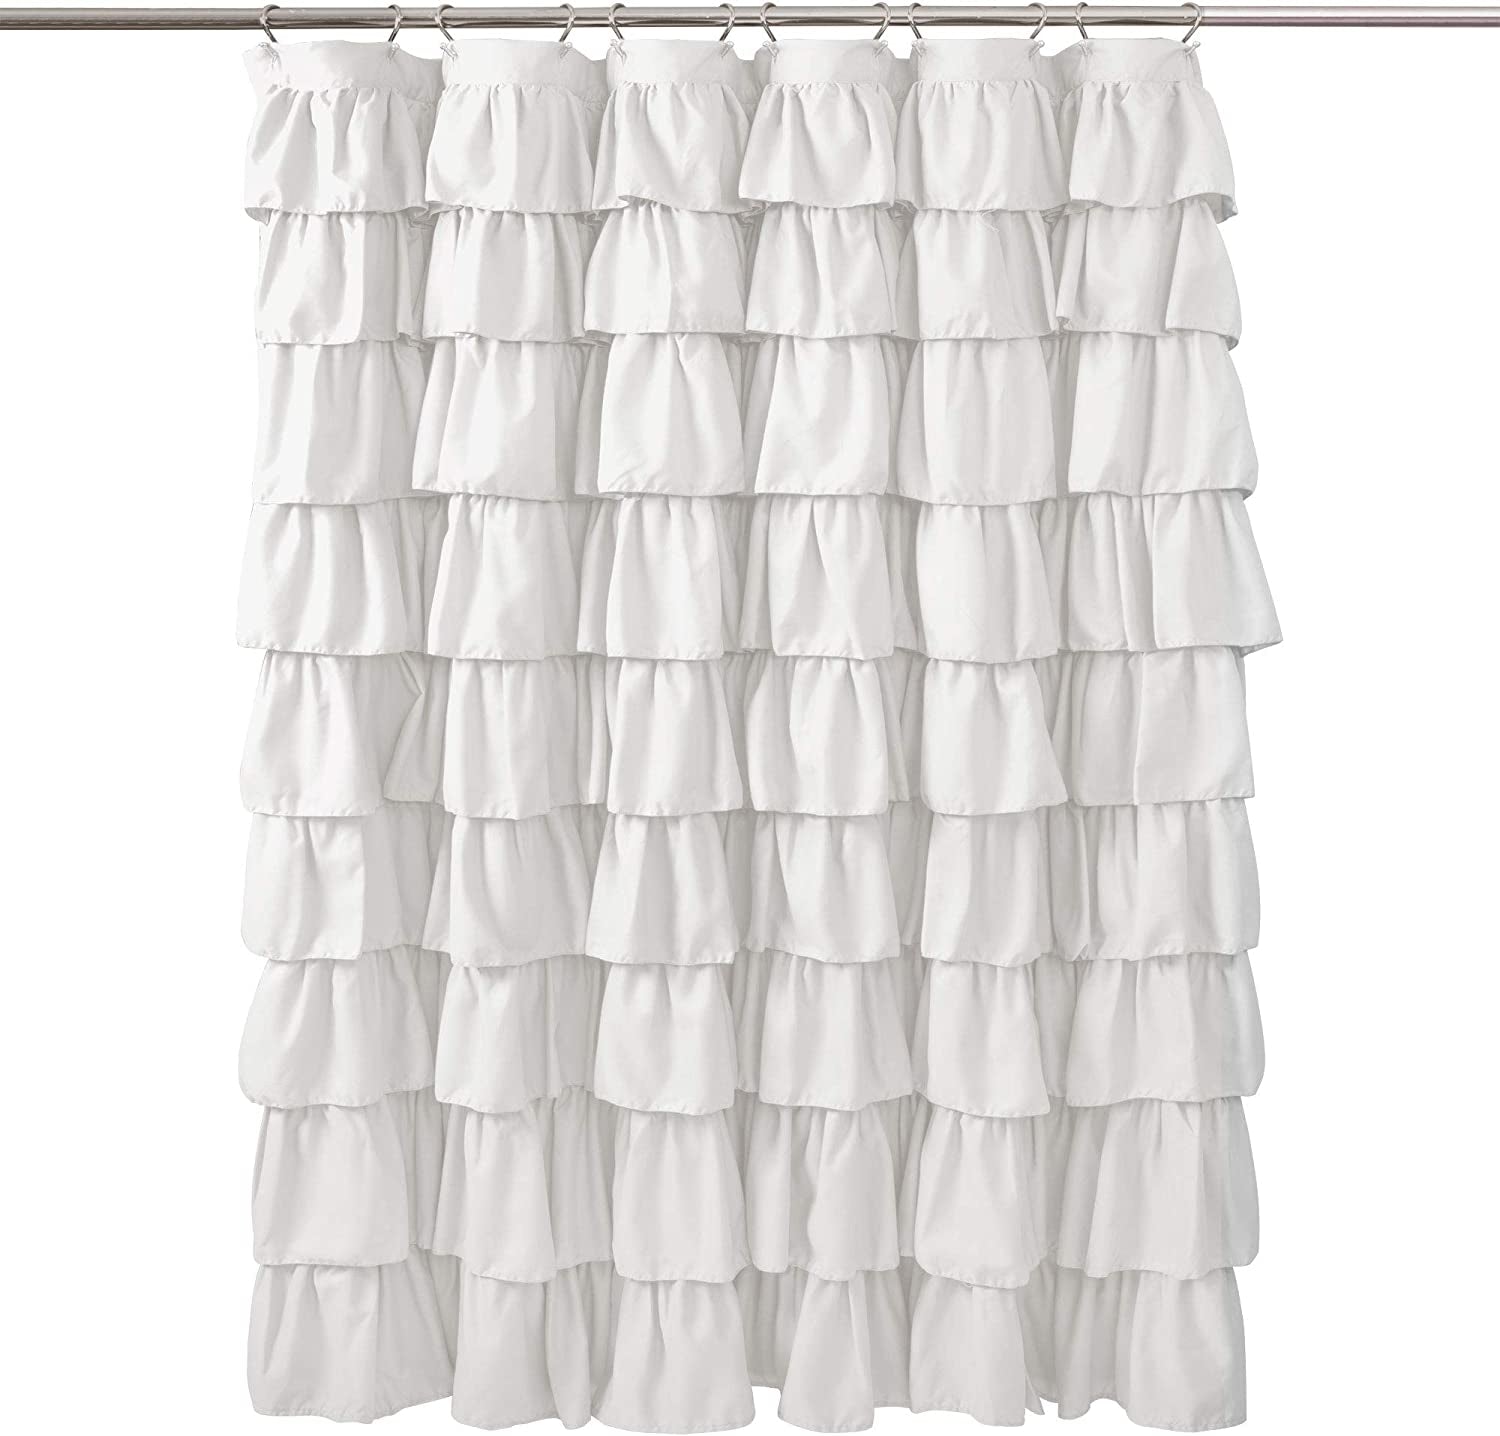 Ruffle Shower Curtain by Lush Decor | Vintage Chic Farmhouse Style Design with Floral Textured Pattern, White, 72" X 72"